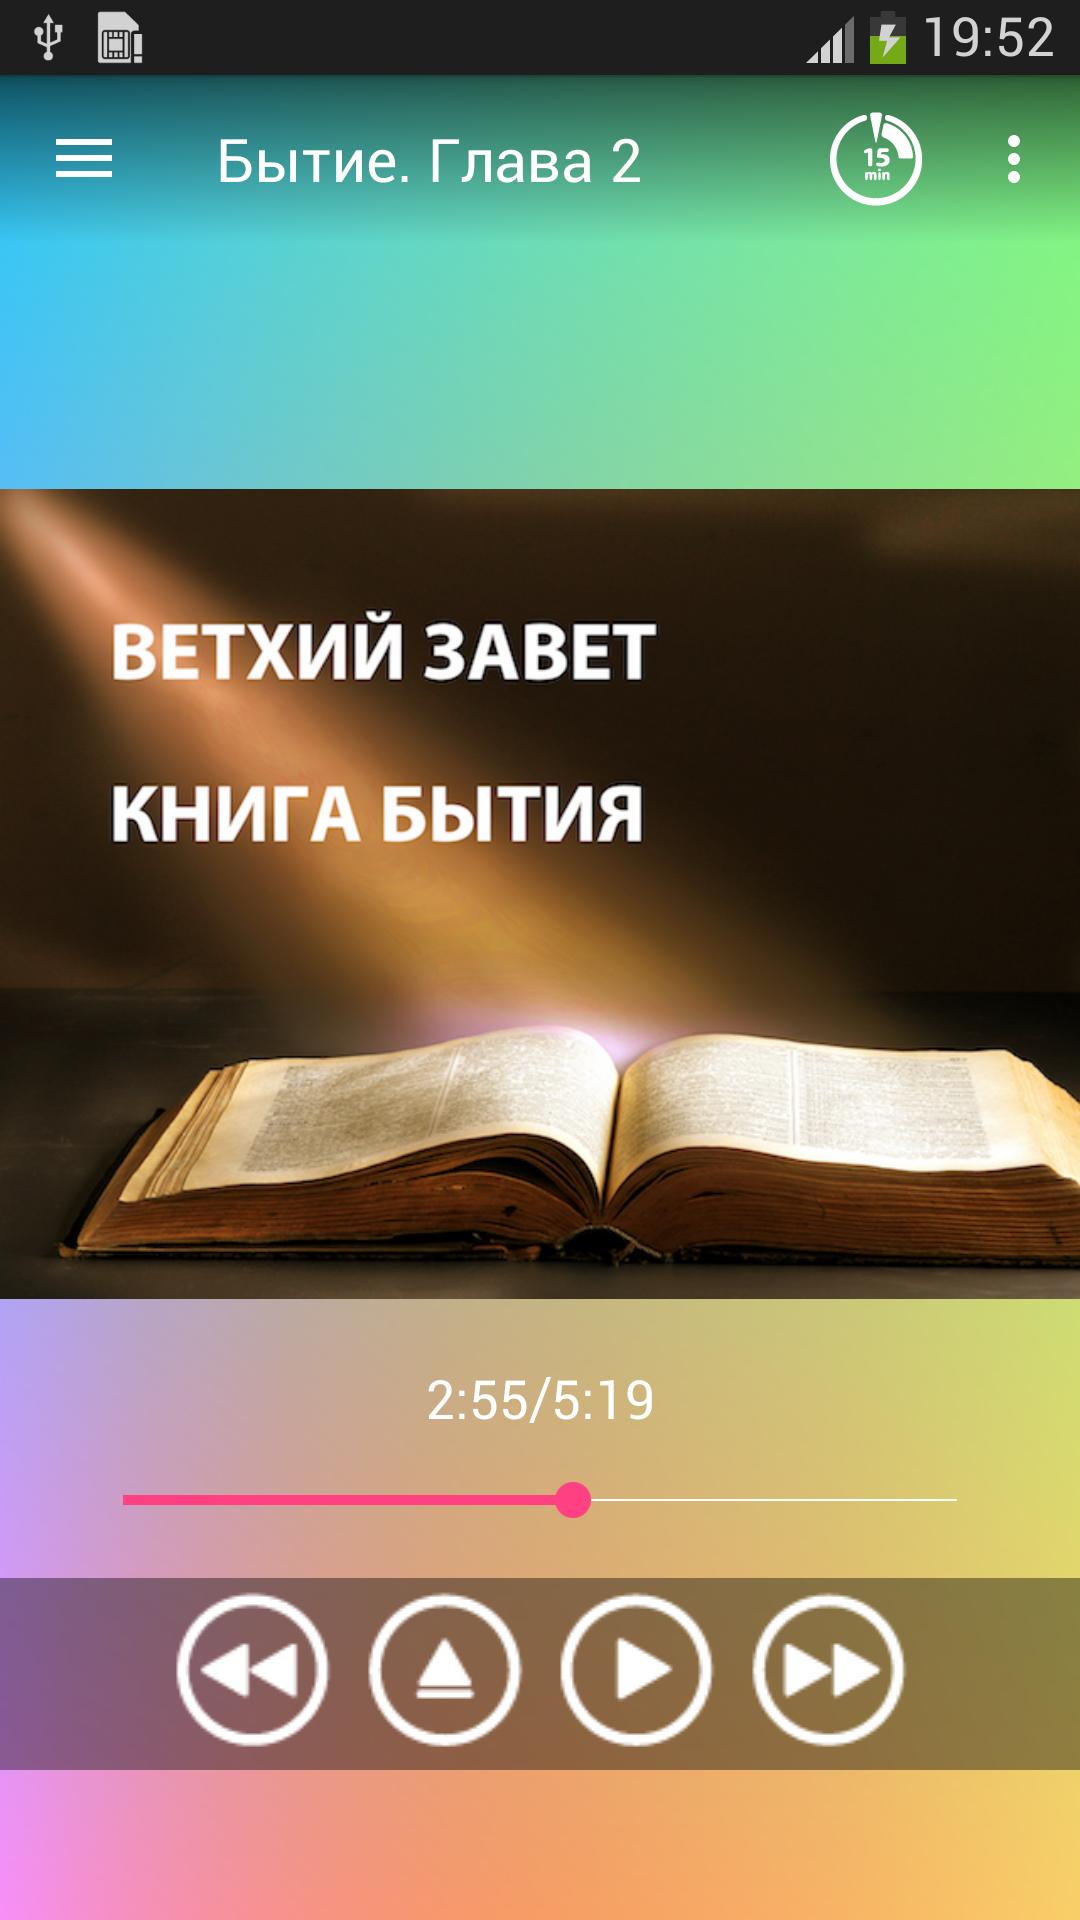 Аудио Библия for Android - APK Download